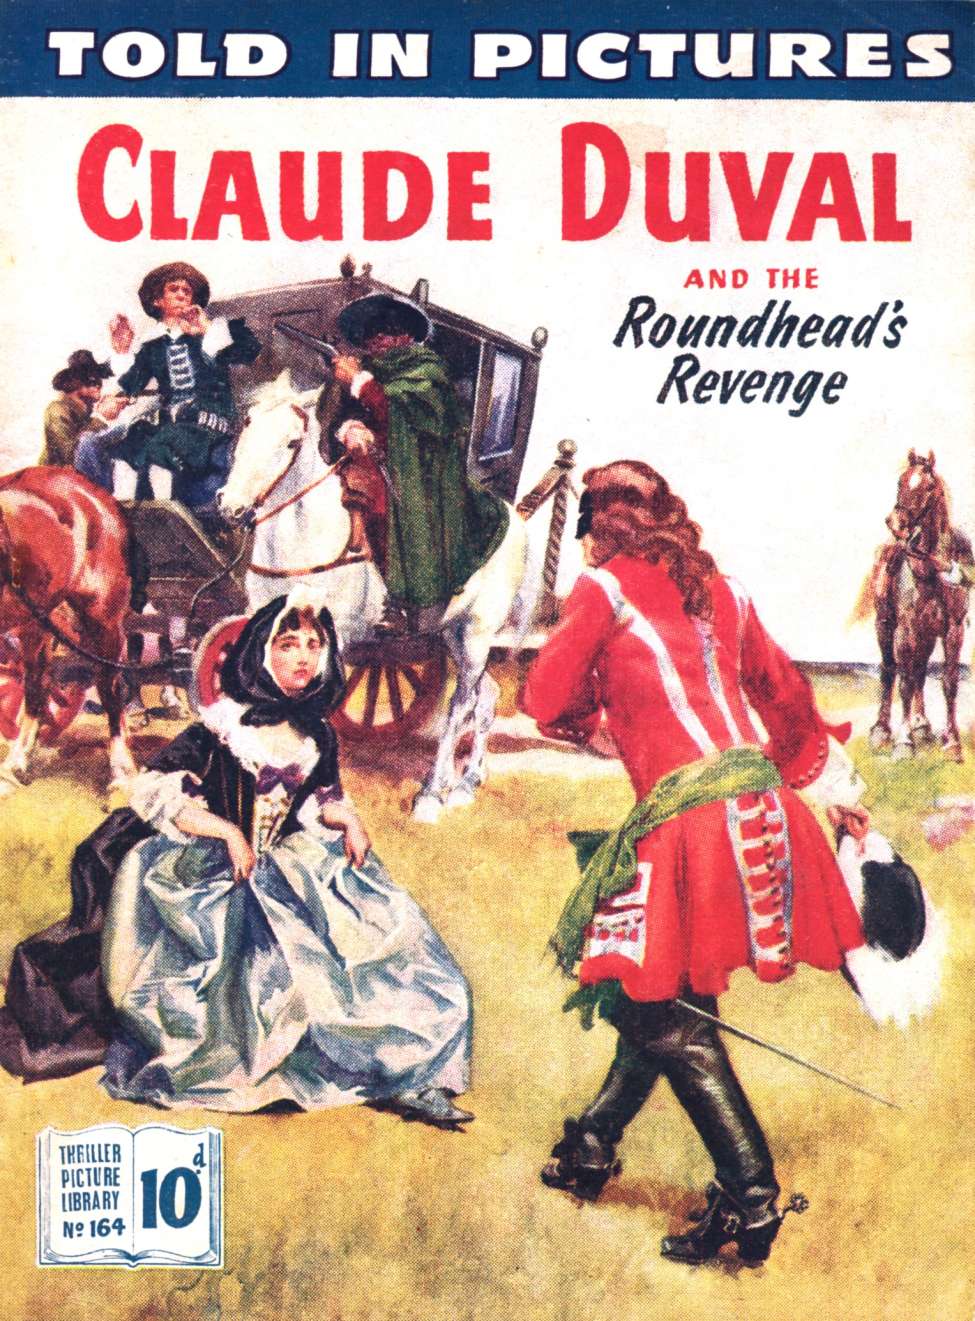 Book Cover For Thriller Picture Library 164 - Claude Duval and the Roundhead's Revenge